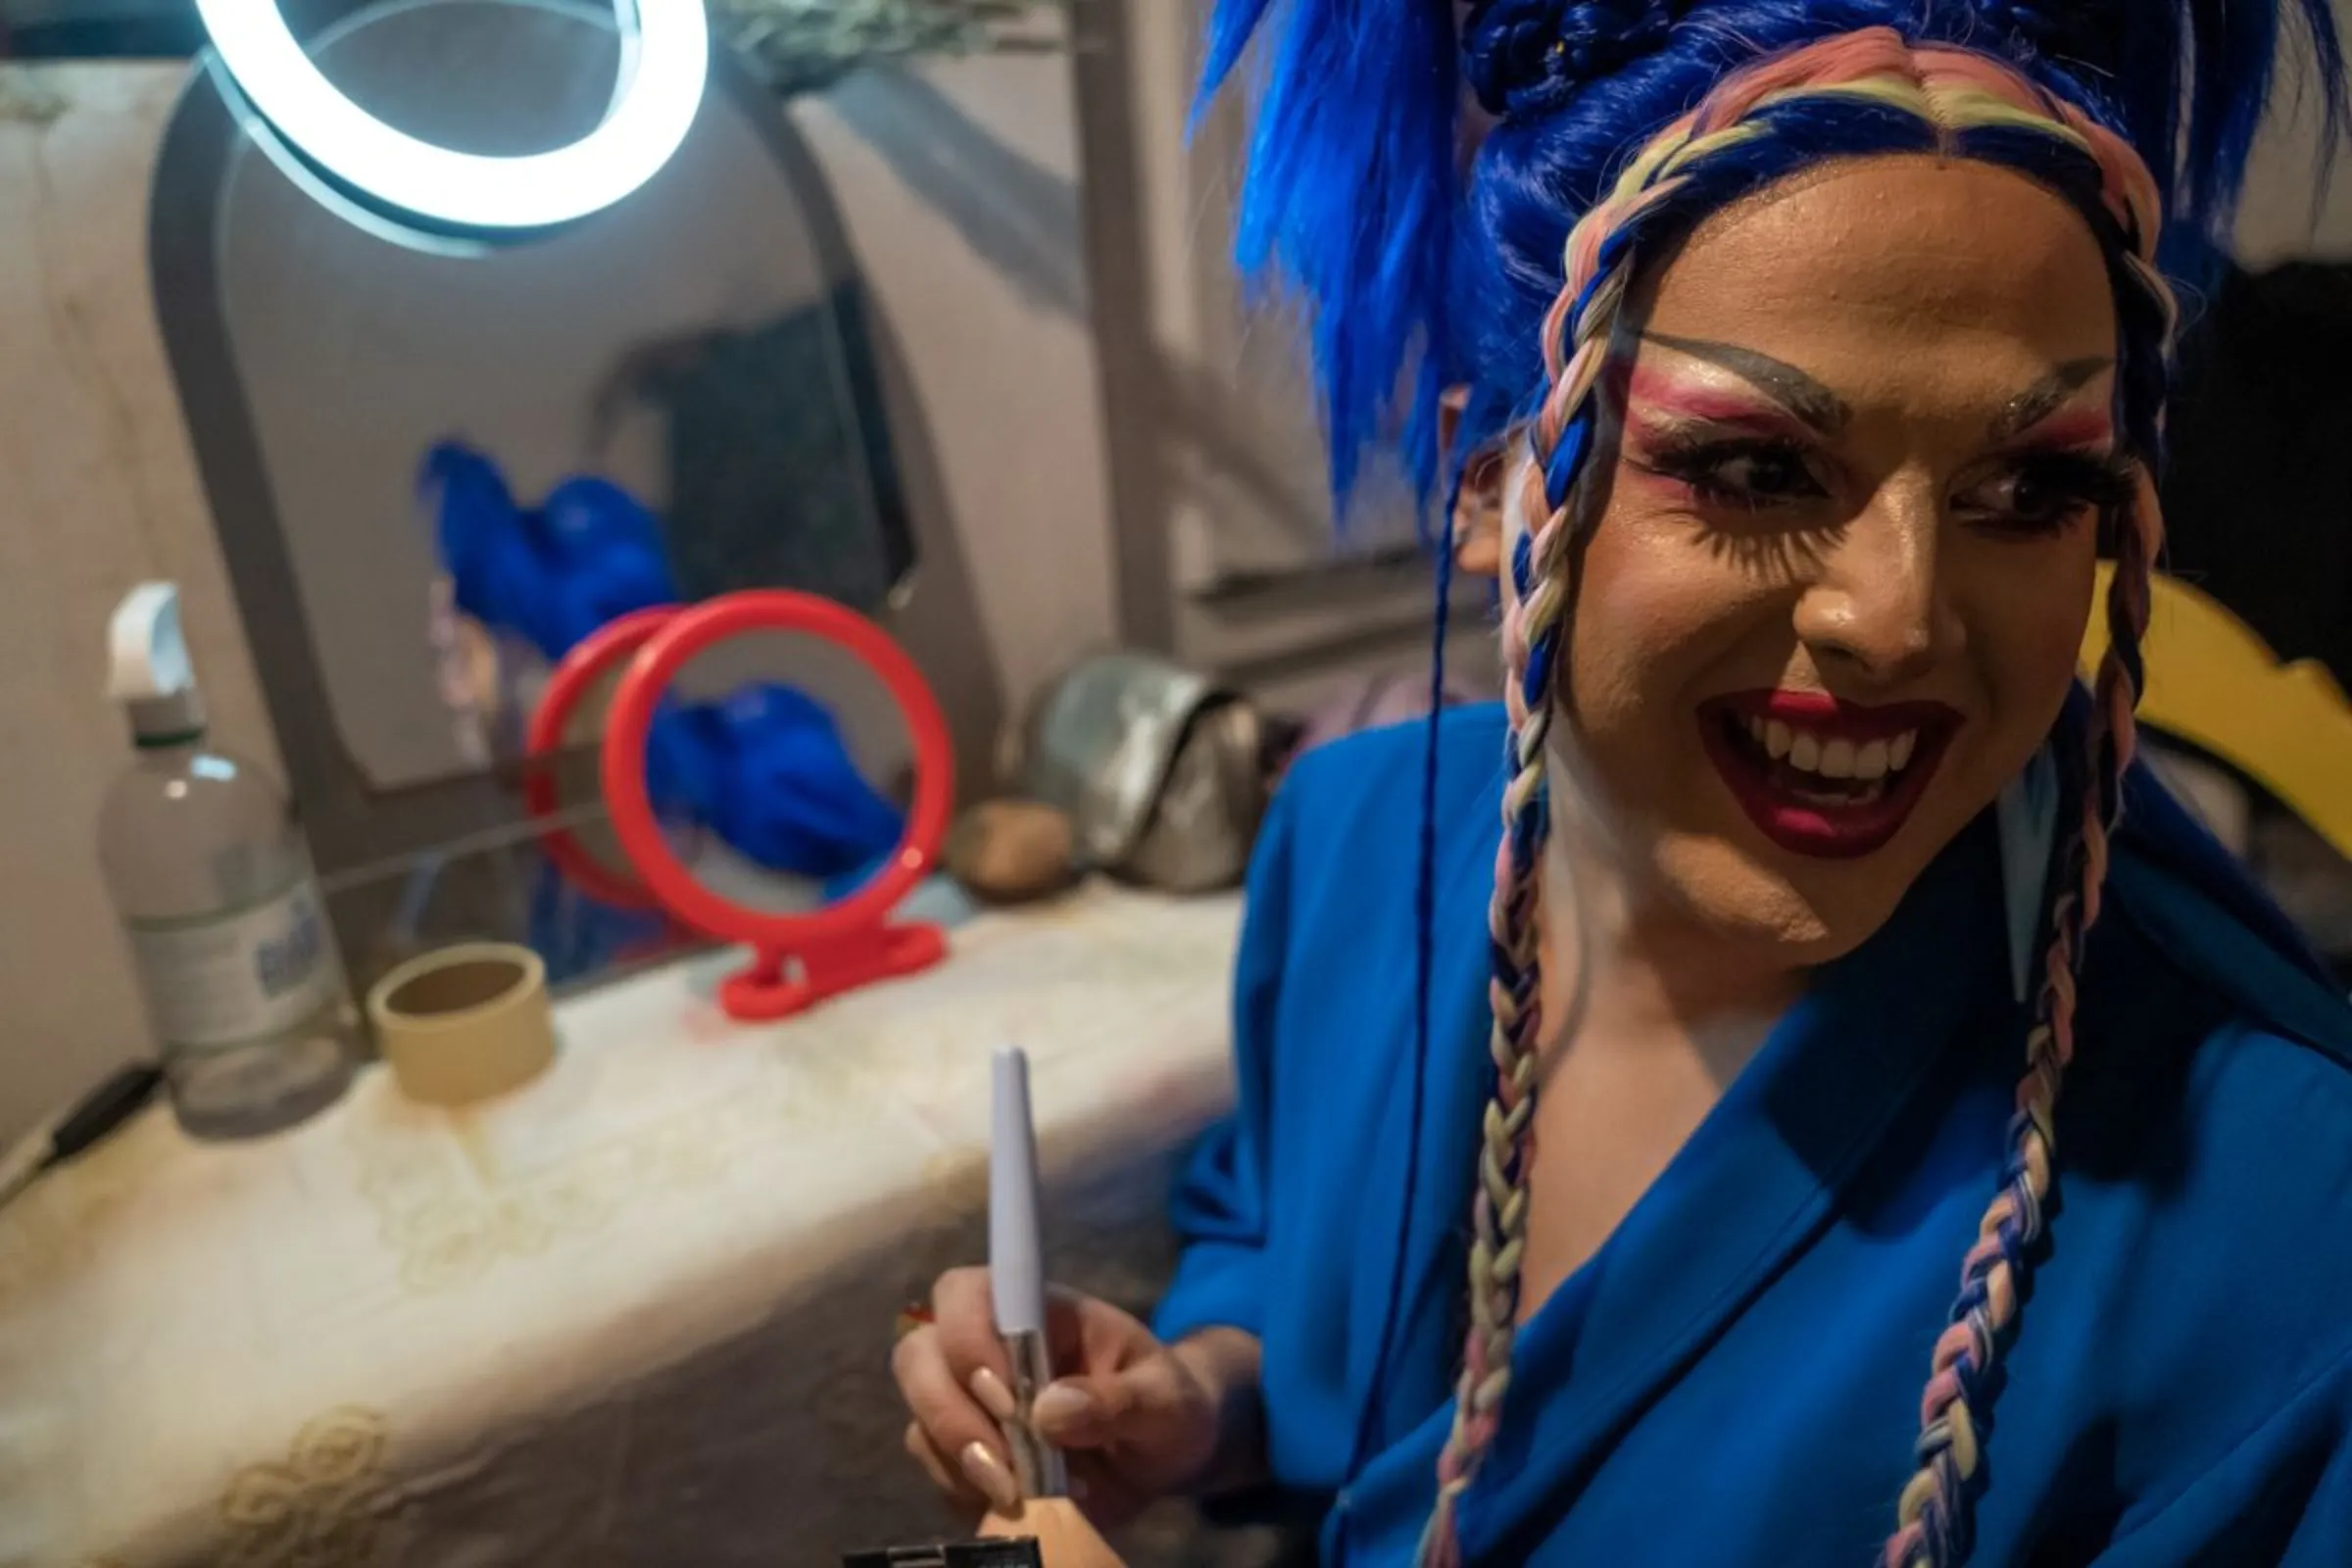 Dislexia Severa smiles backstage before walking the runway at a late-night drag show in Asunción, Paraguay, February 22, 2023